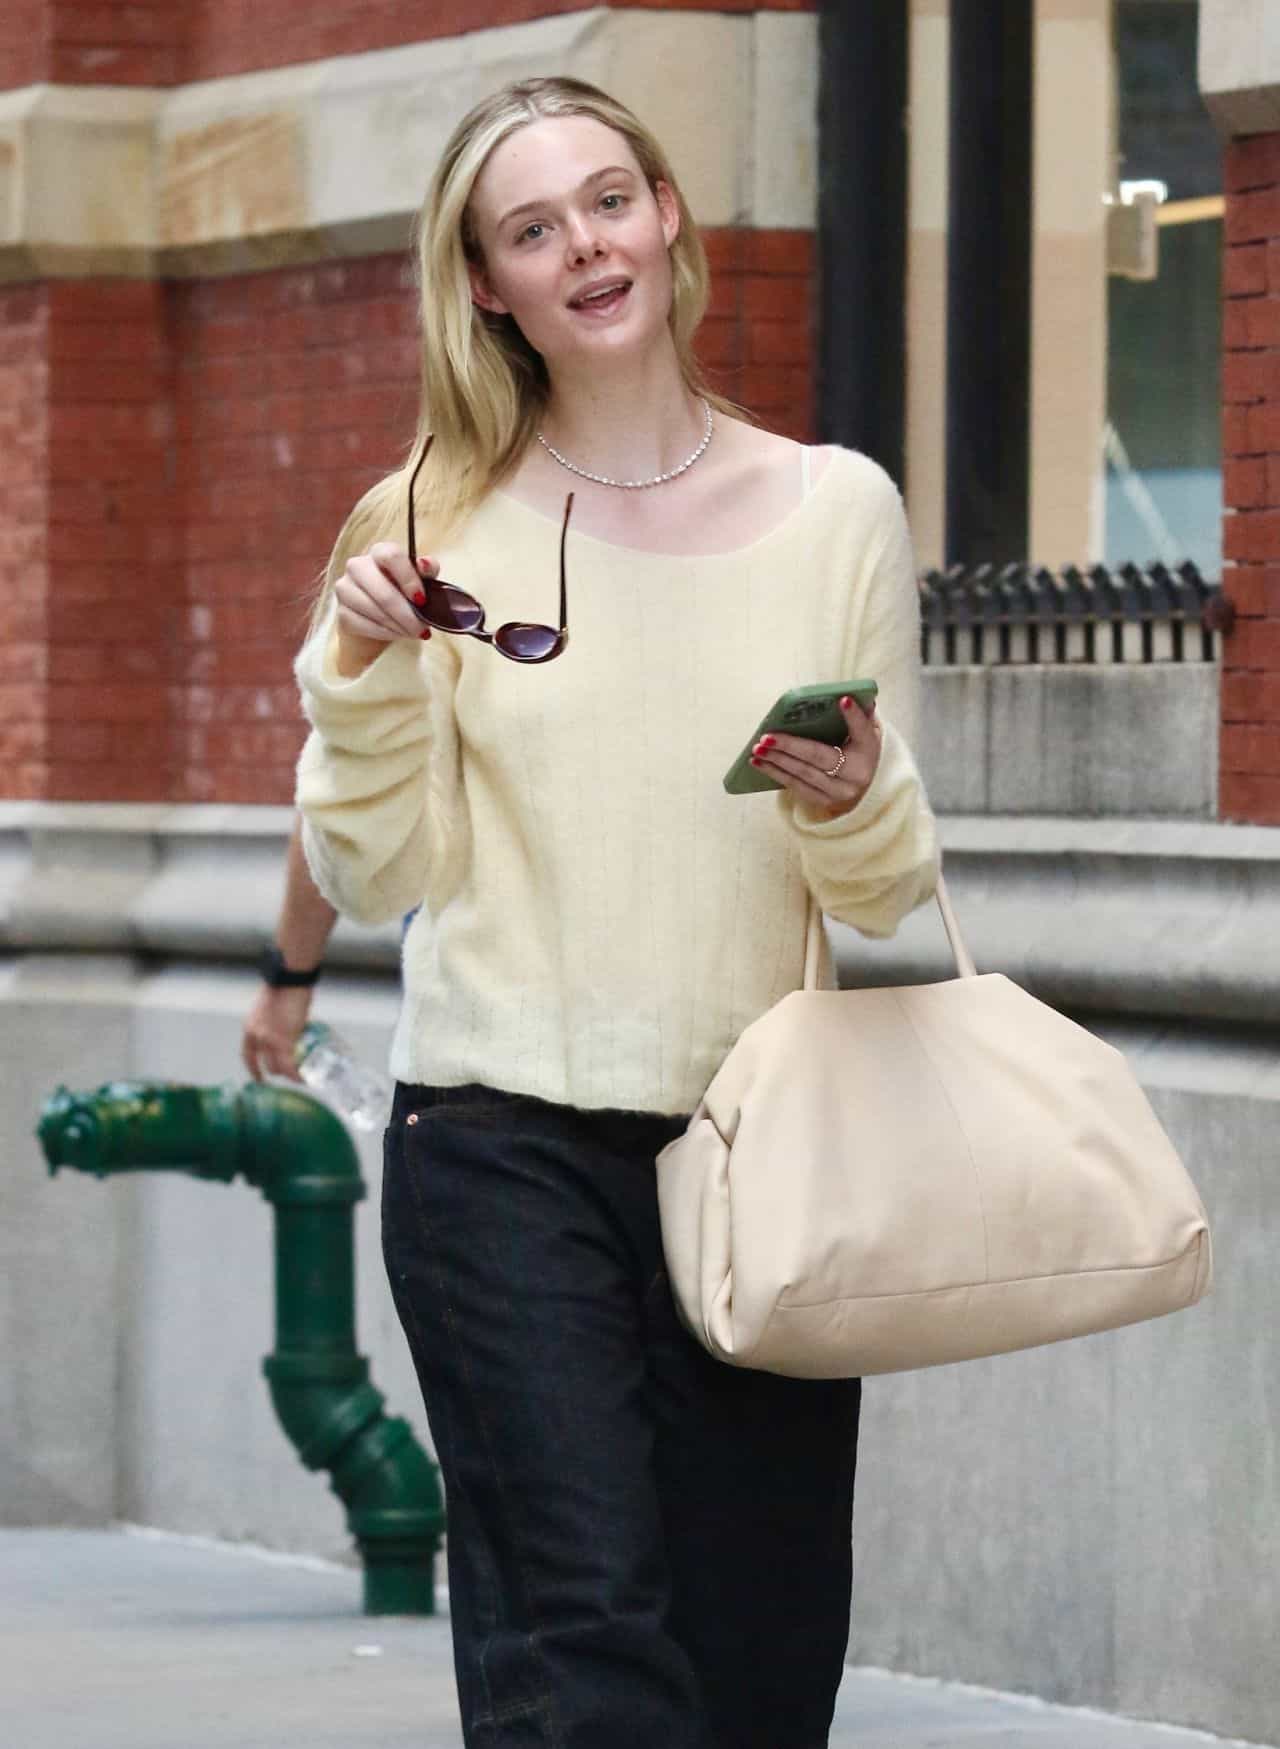 Elle Fanning Rocks Buttery Yellow Top and Black Pants in New York City